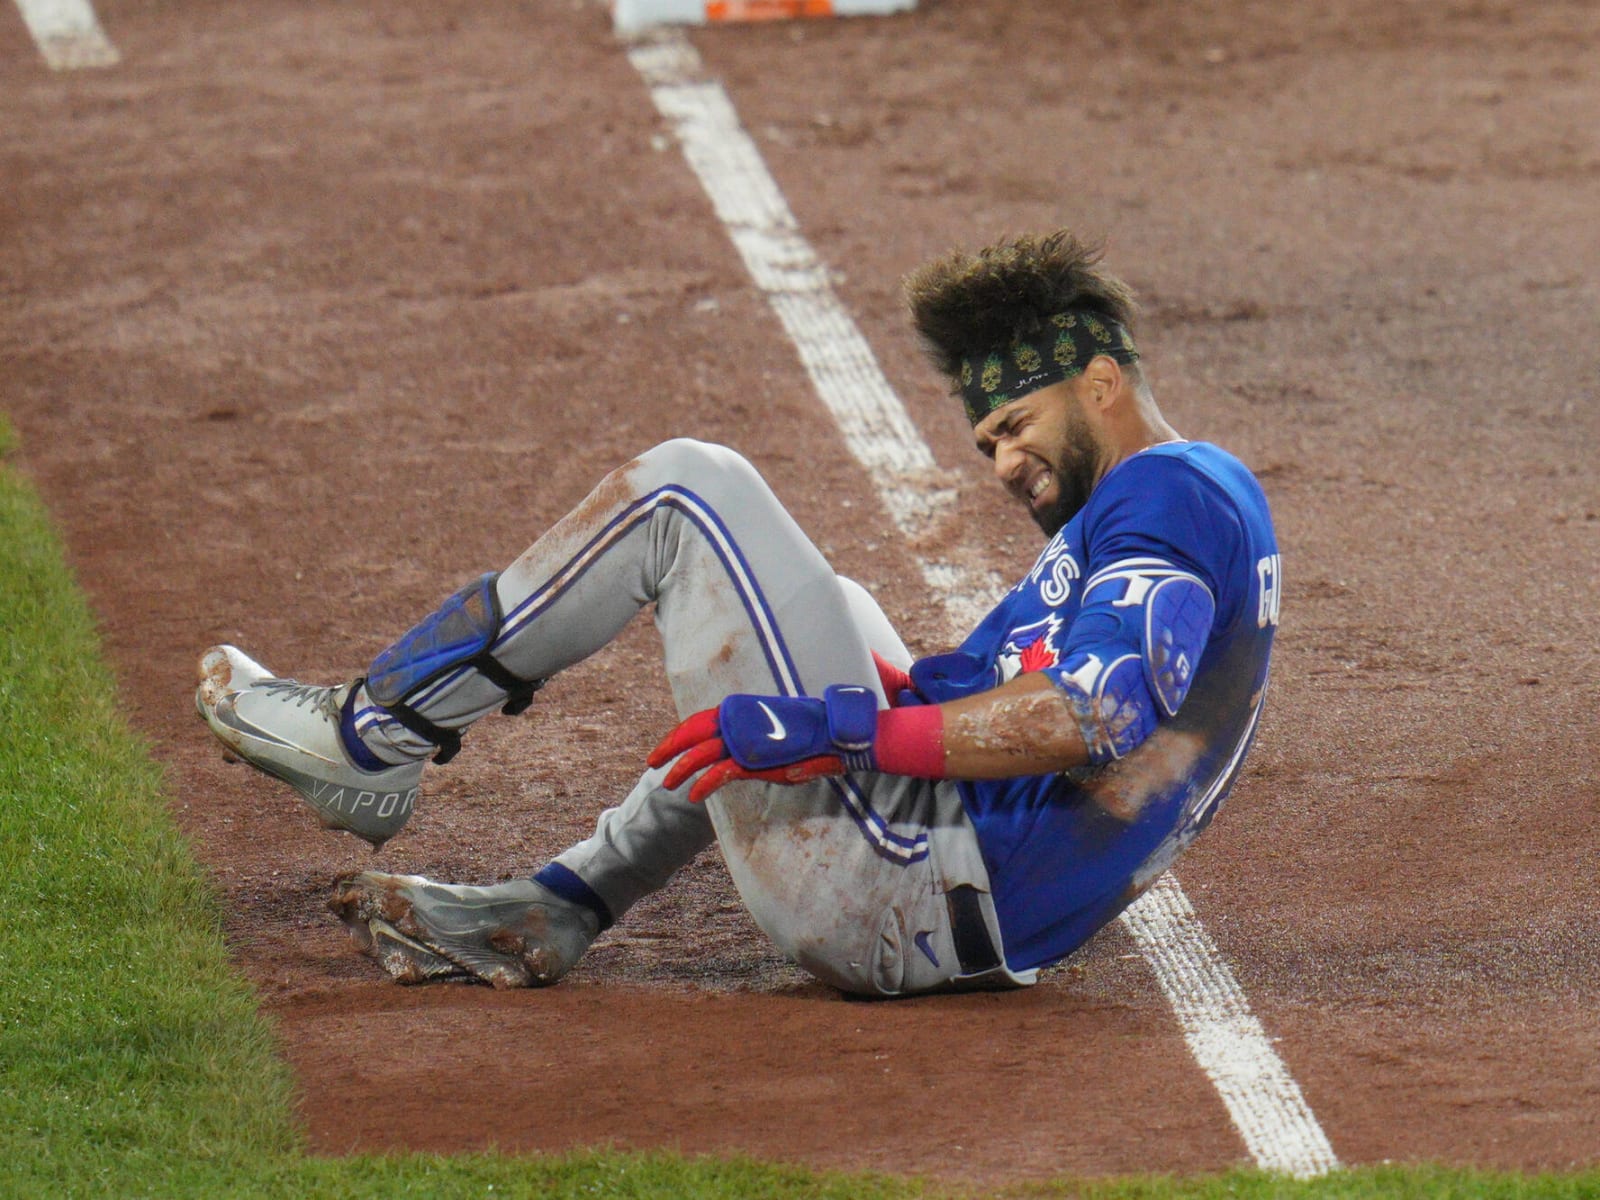 Blue Jays place Gurriel Jr. on 10-day IL due to left hamstring strain